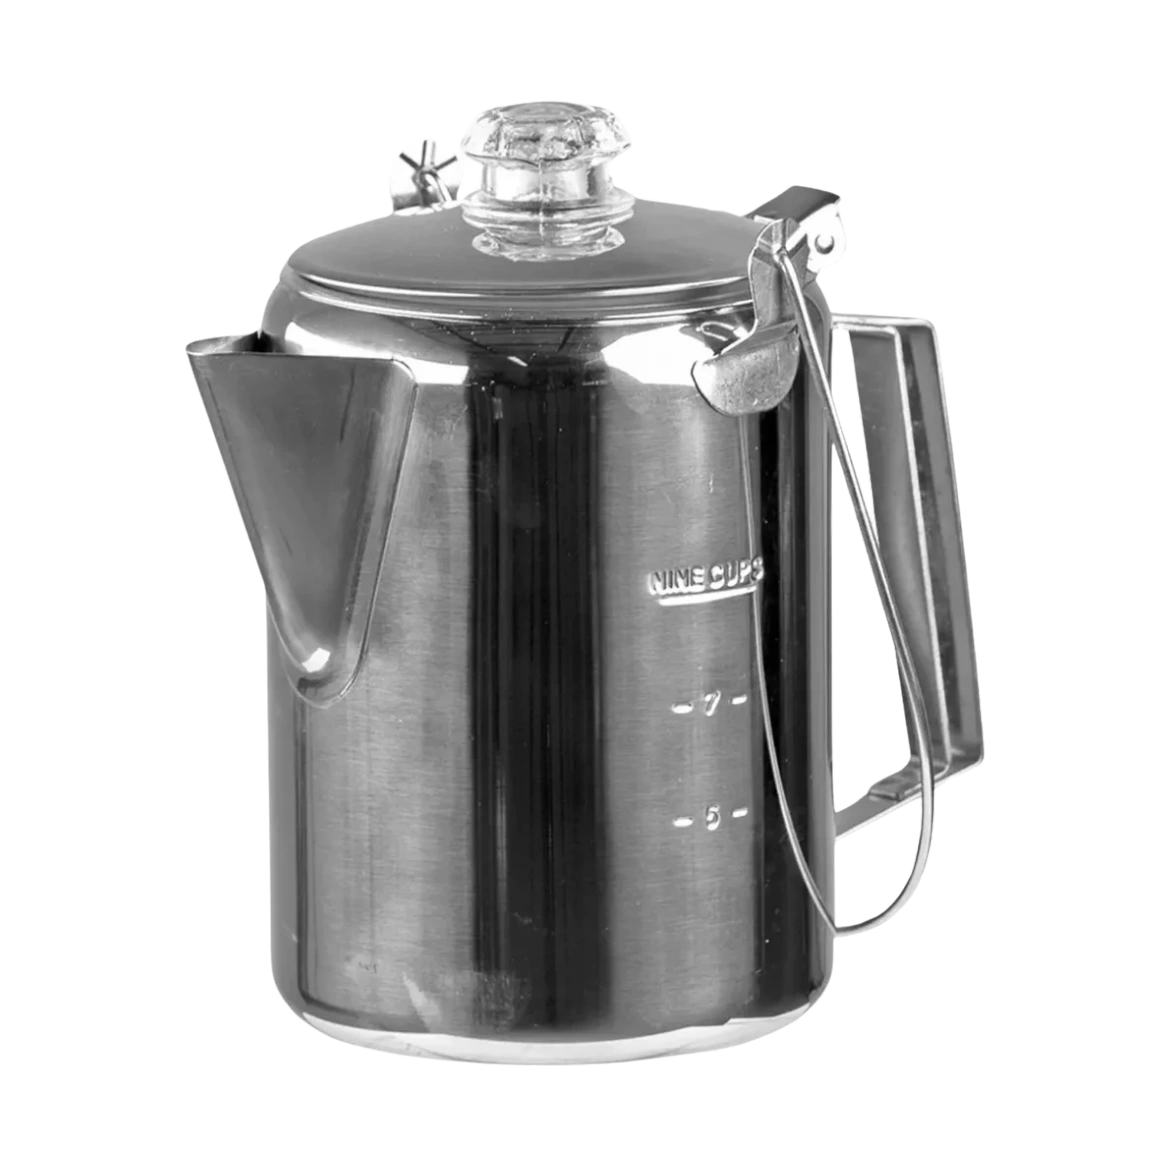 Hillbond Camping Coffee Percolator 9 Cup Stainless Steel Coffee